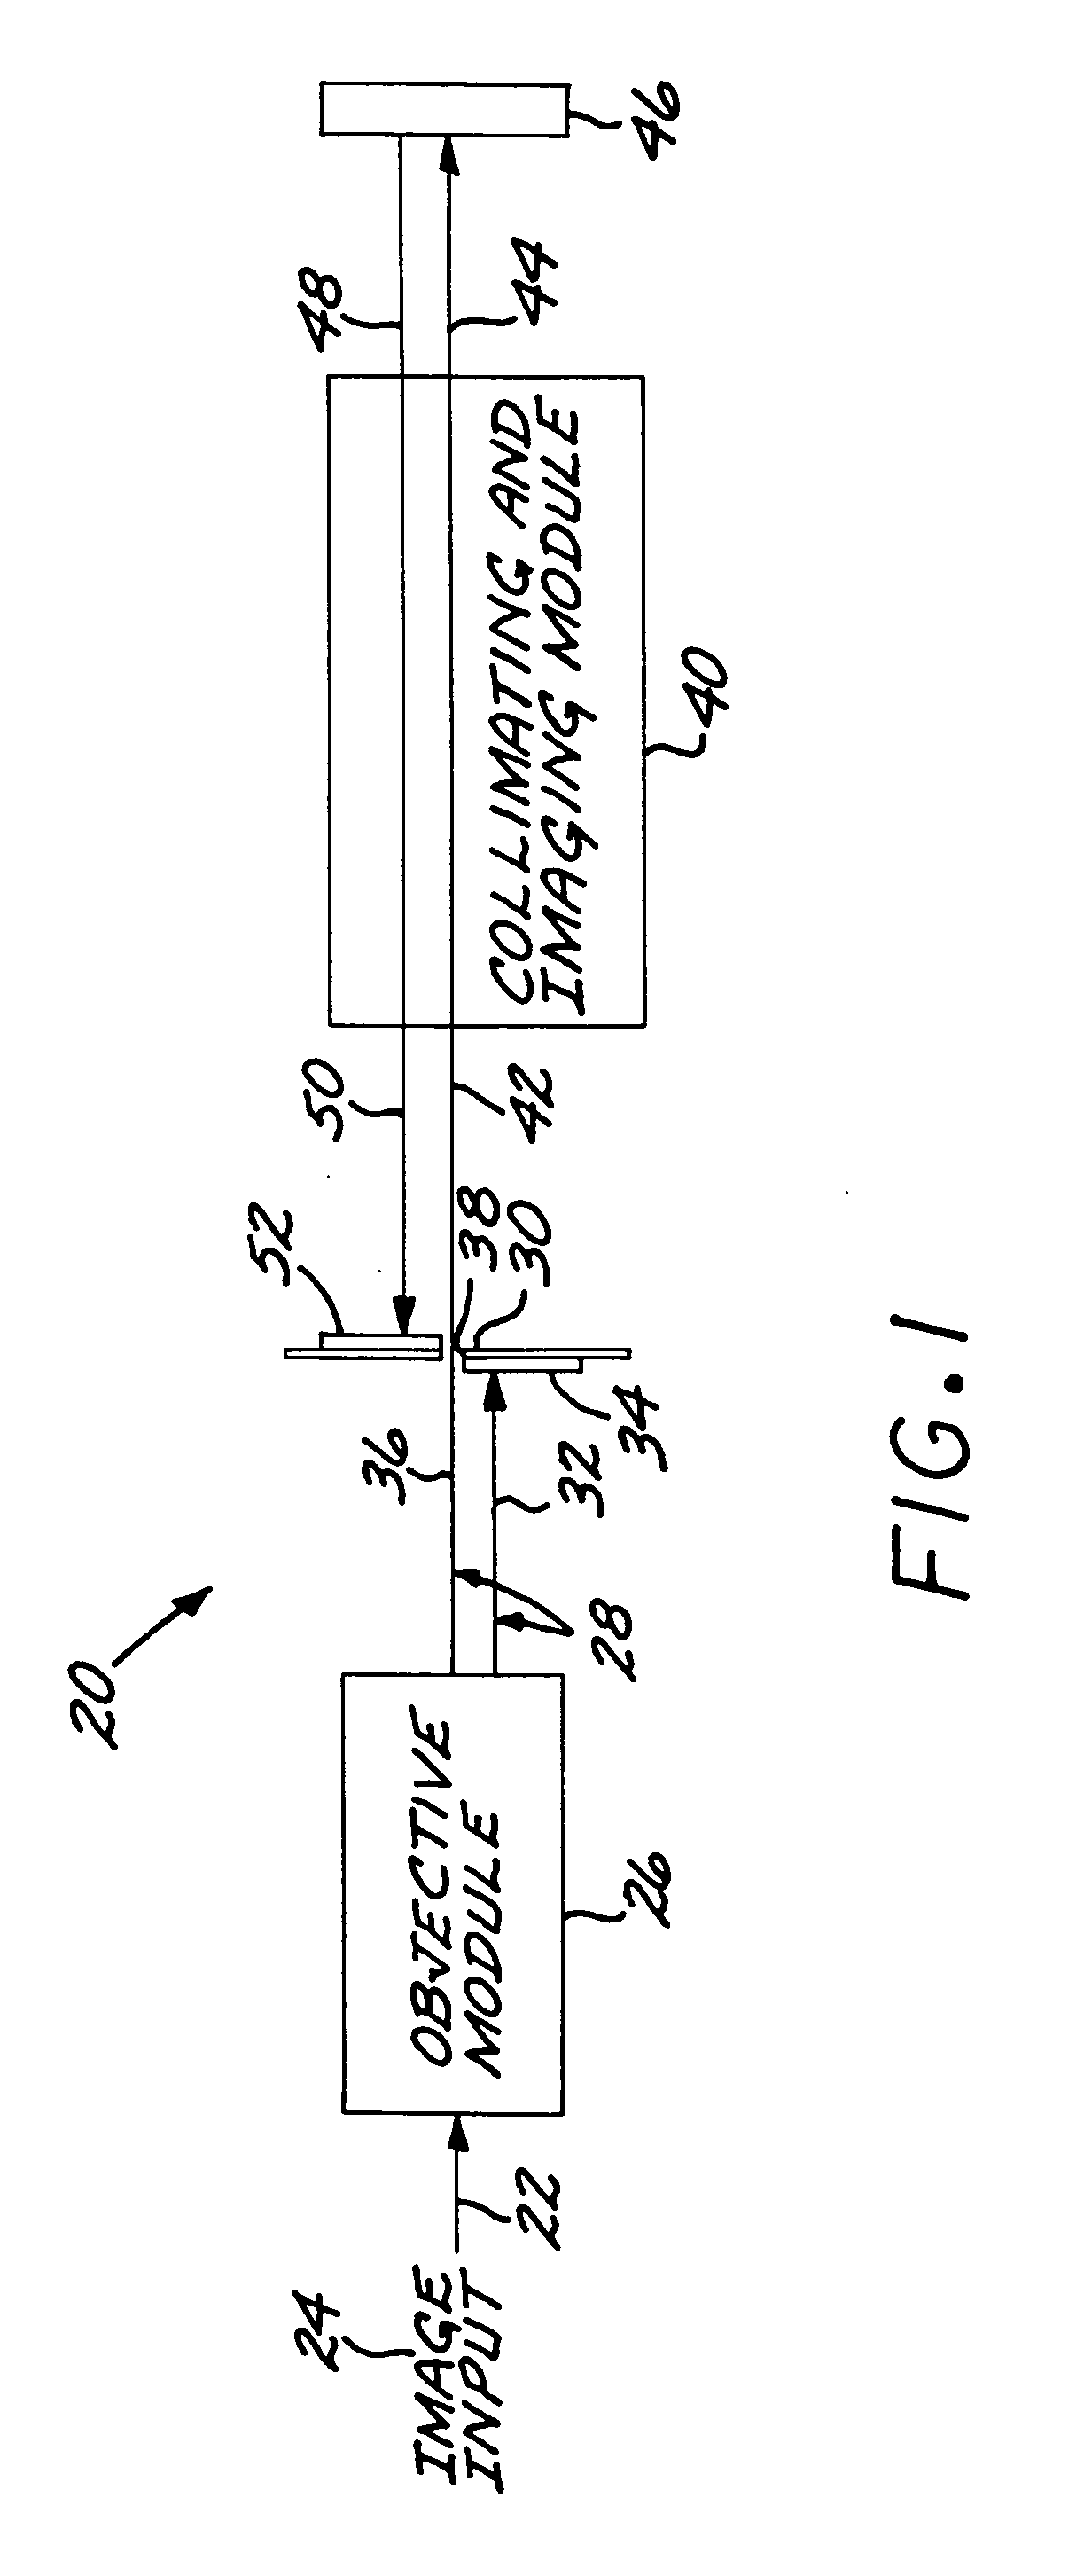 High-resolution, all-reflective imaging spectrometer